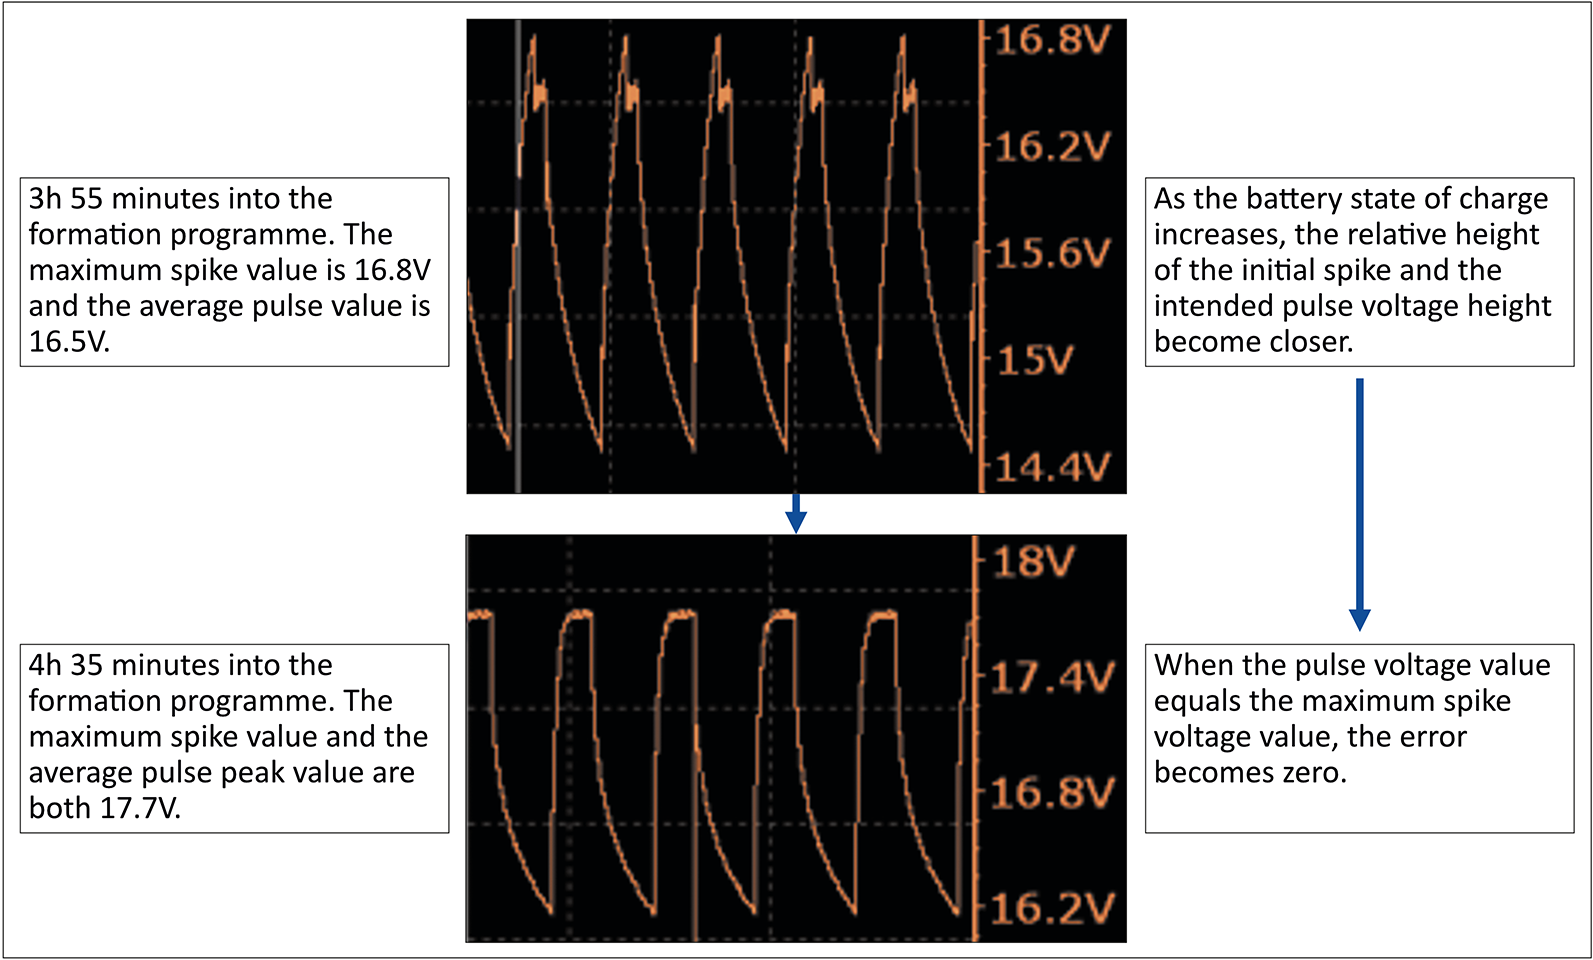 Fig 6 Voltage spike error reducing with progress of formation schedule and SoC of battery.